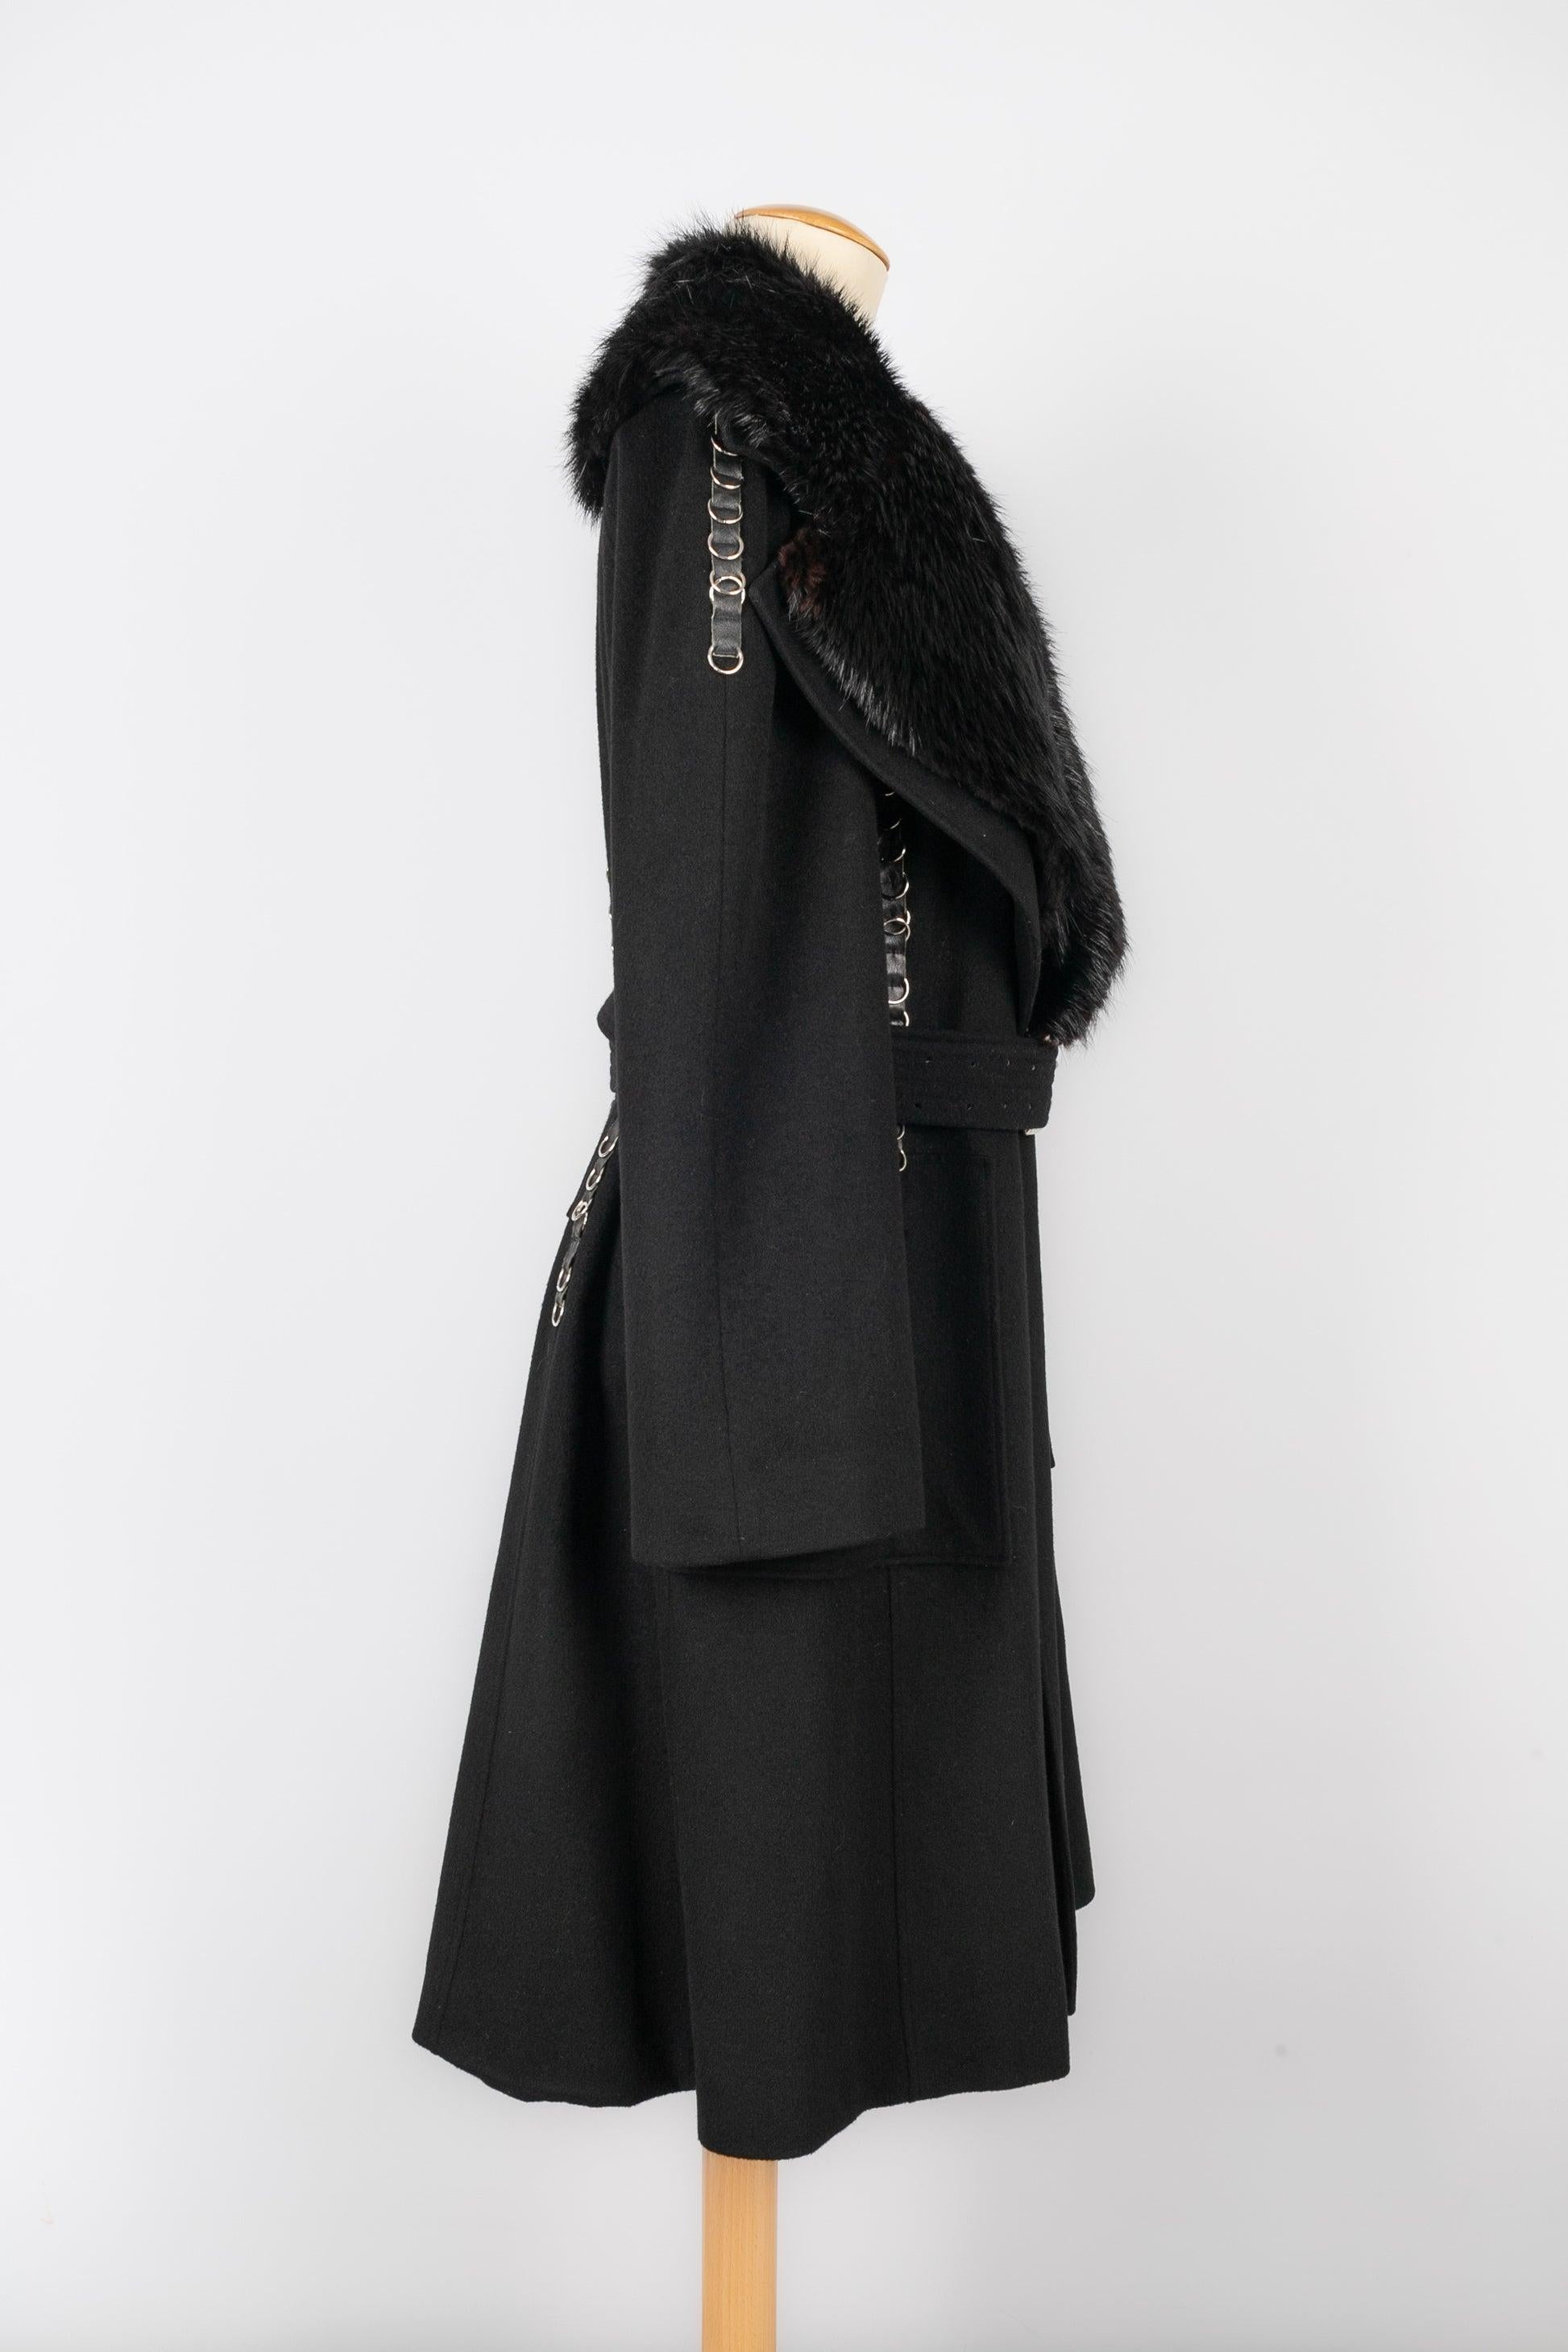 Women's Paco Rabanne Coat Ornamented with Fur Collar For Sale